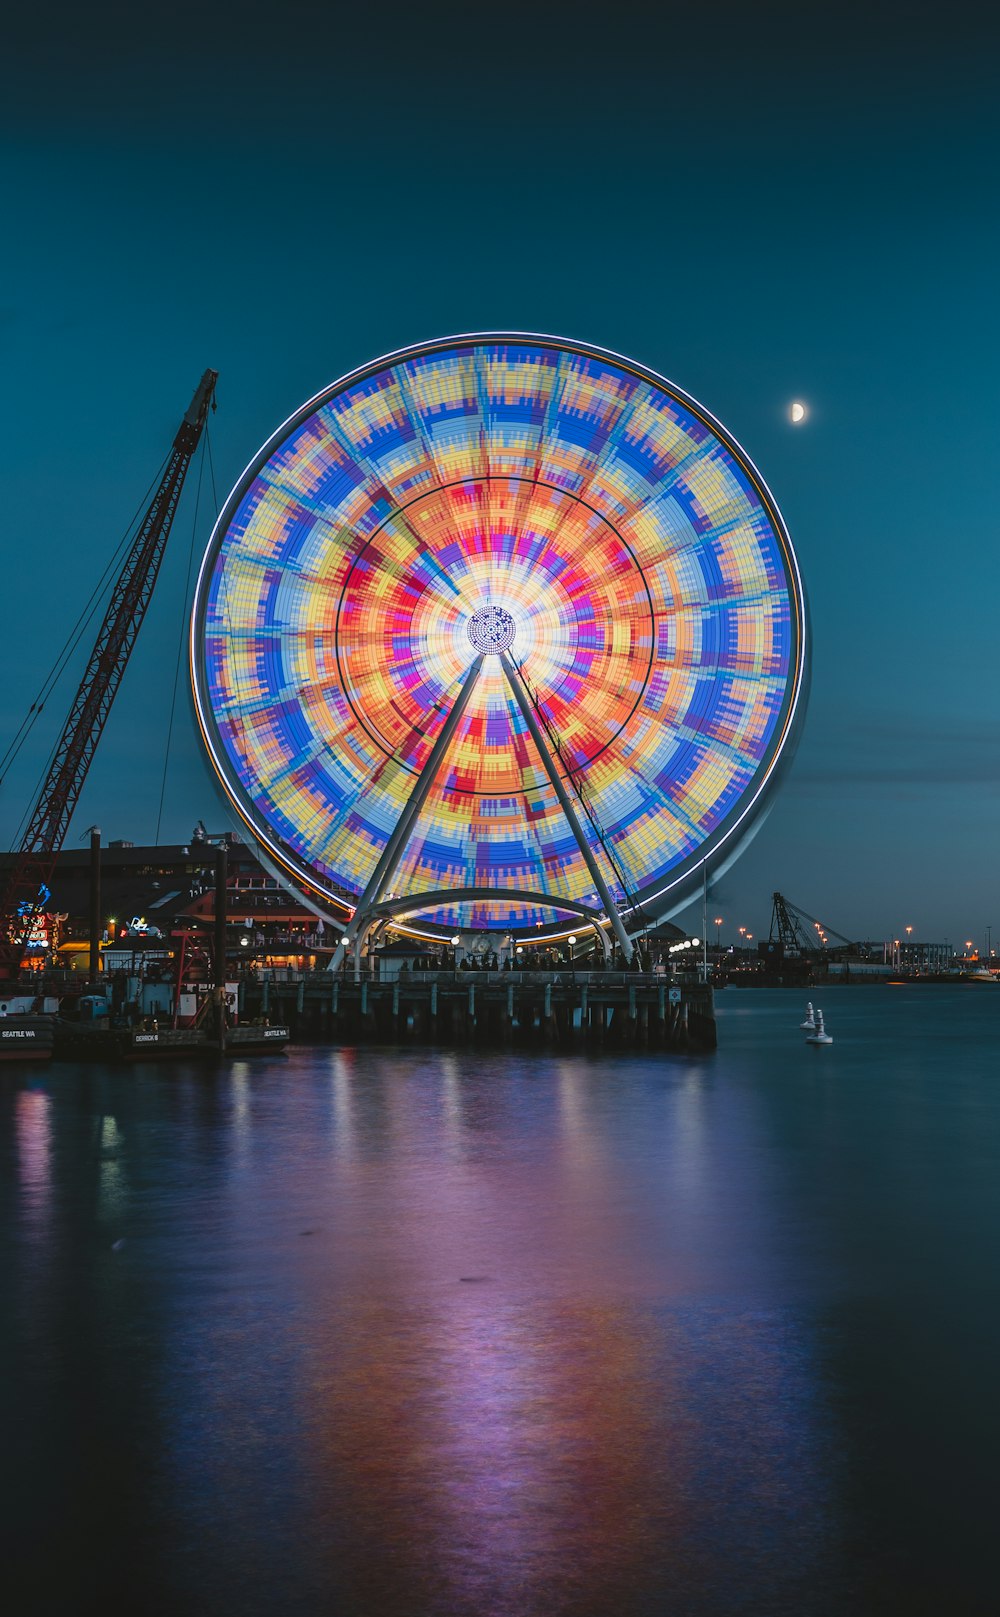 multicolored ferris wheel in amusement park near body of water during night time